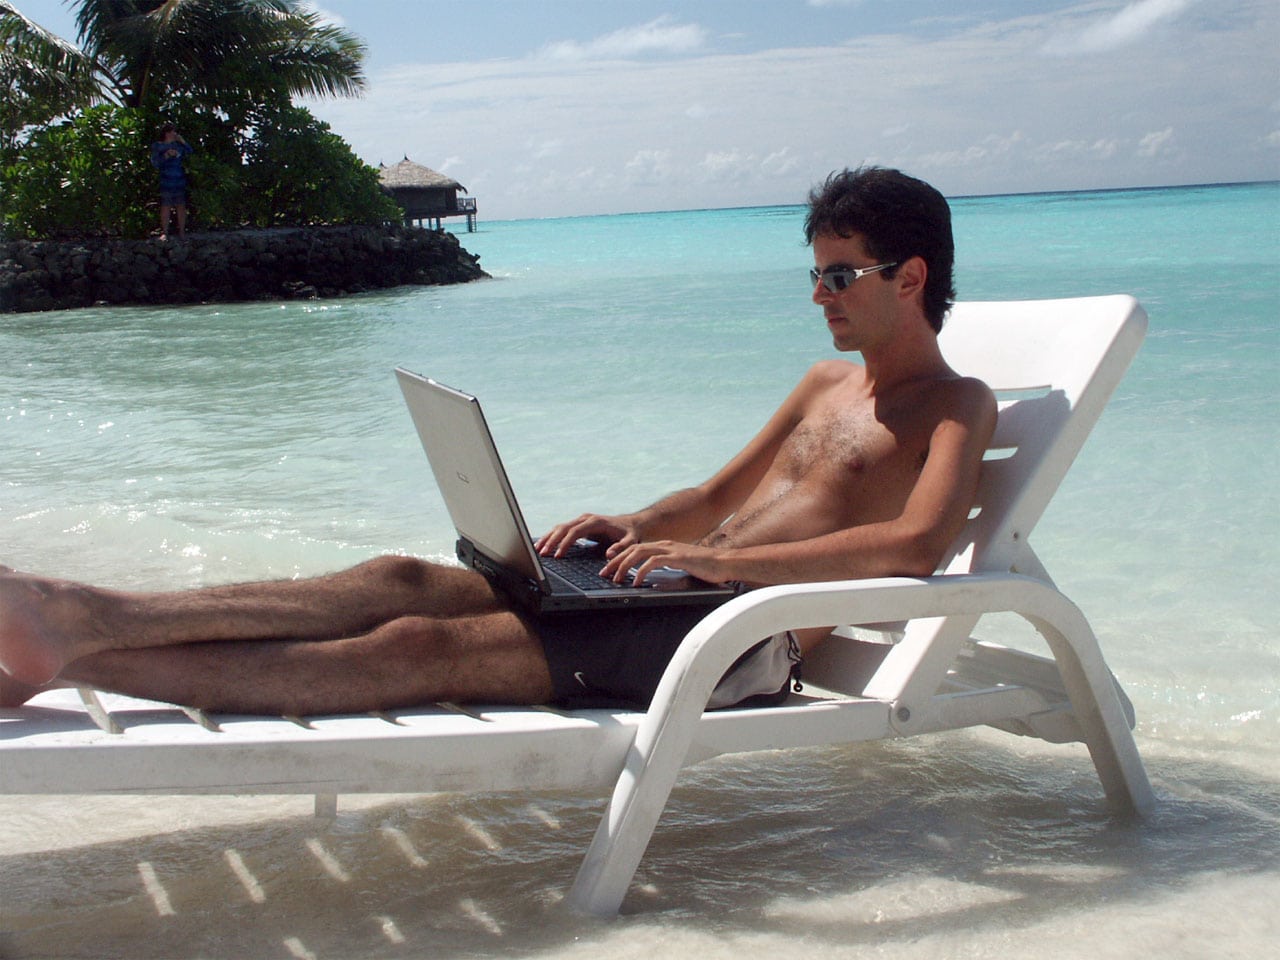 A tourist checks email while on vacation in the Maldives.